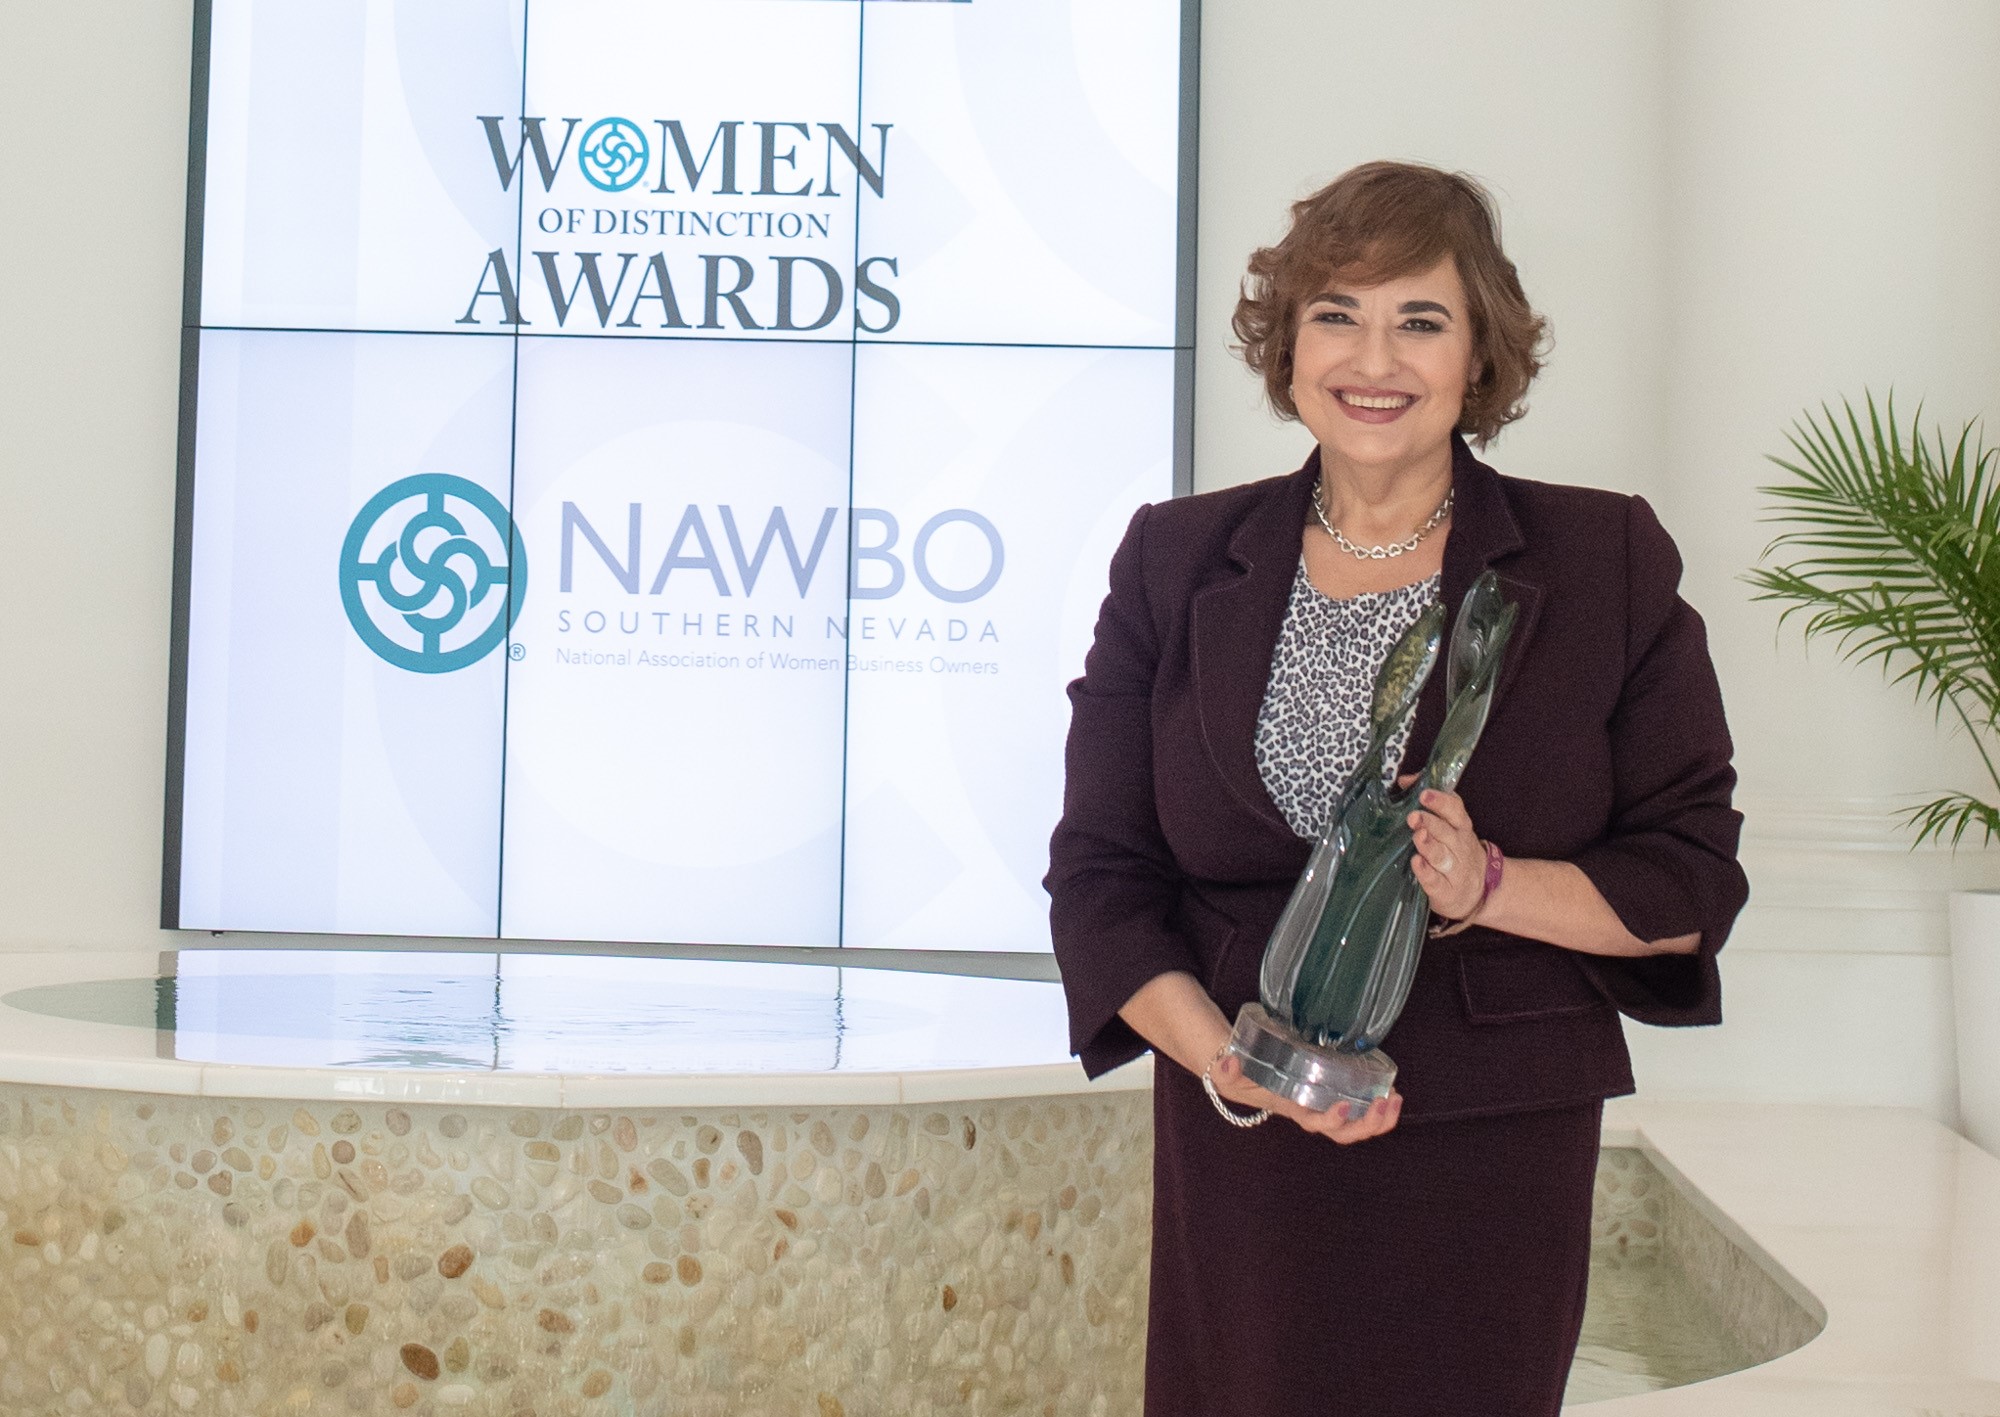 ImageWords principal Ruth Furman receives her Women of Distinction Award on May 7 at the Conference Center of Las Vegas.  (Photo credit: Mary Rendina Photography)